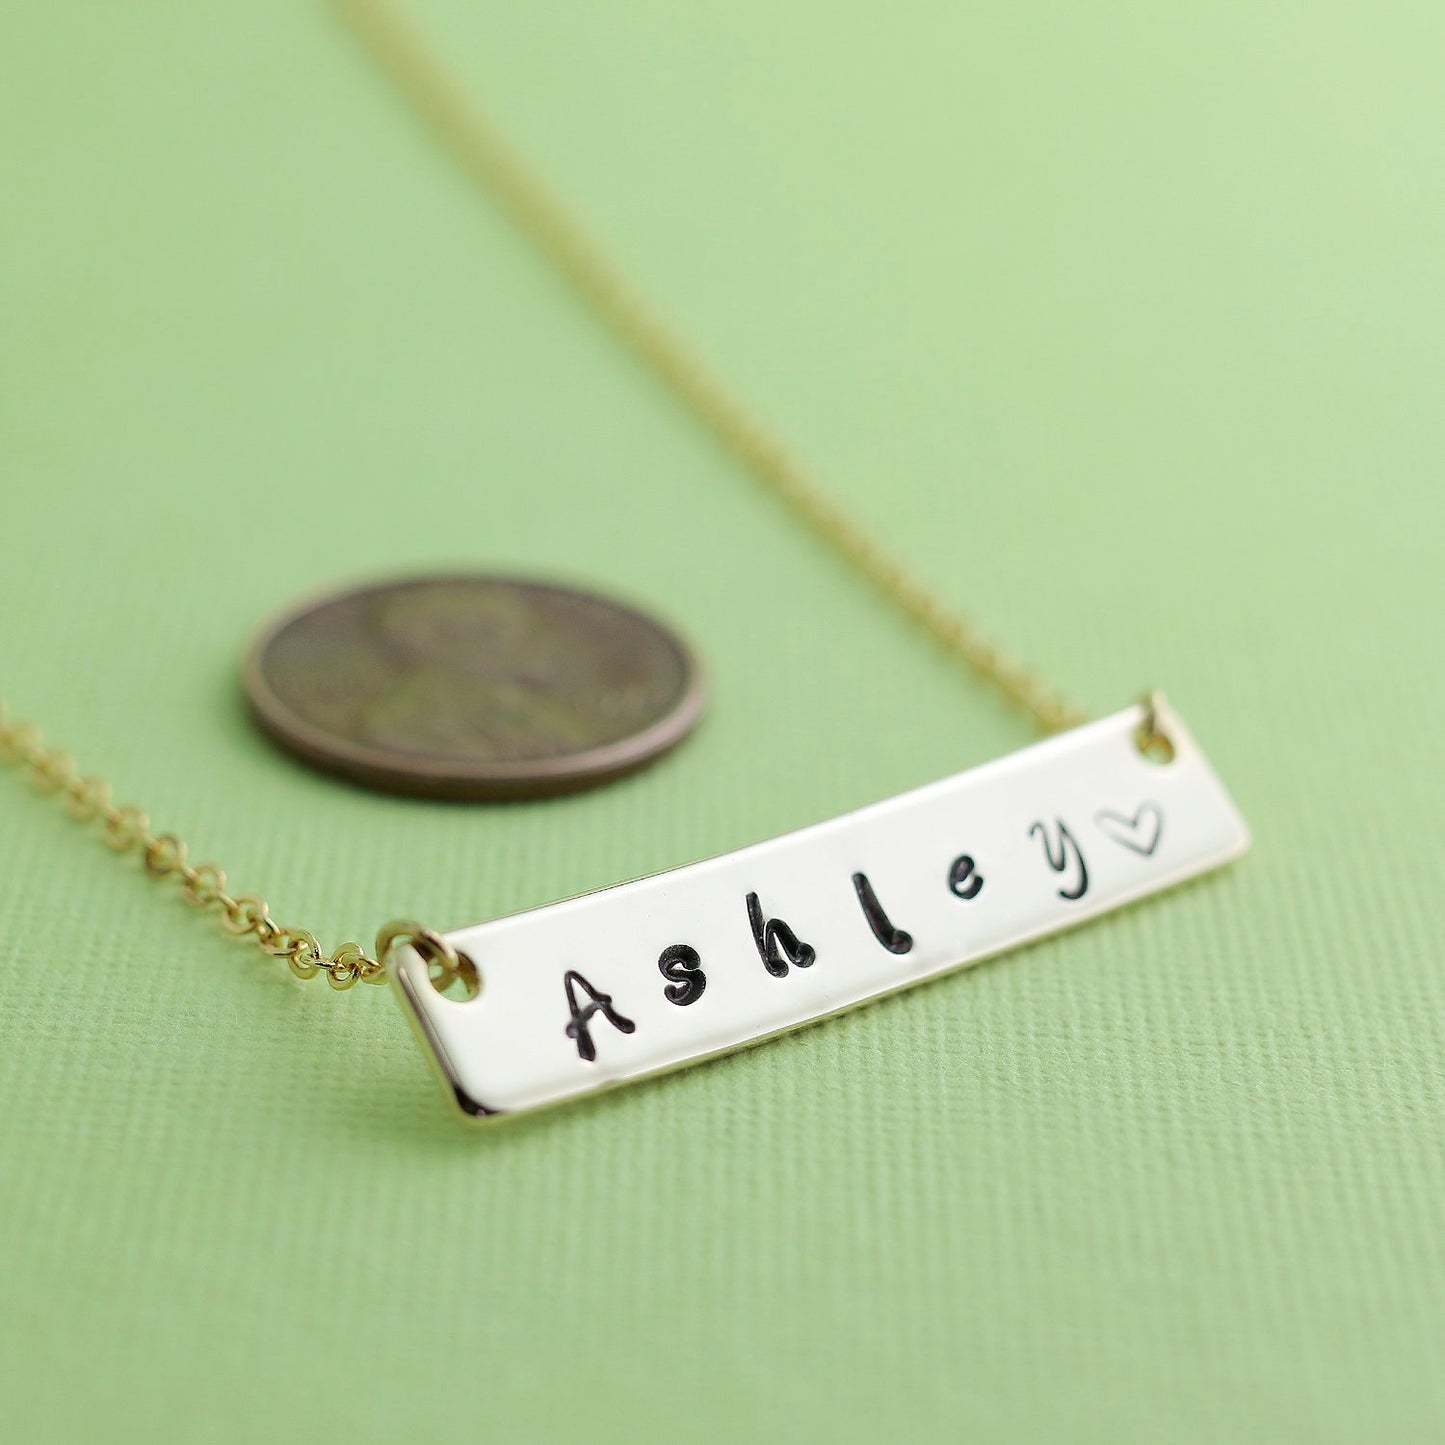 Personalized Name Bar Necklace - Ink filled, Hand stamped